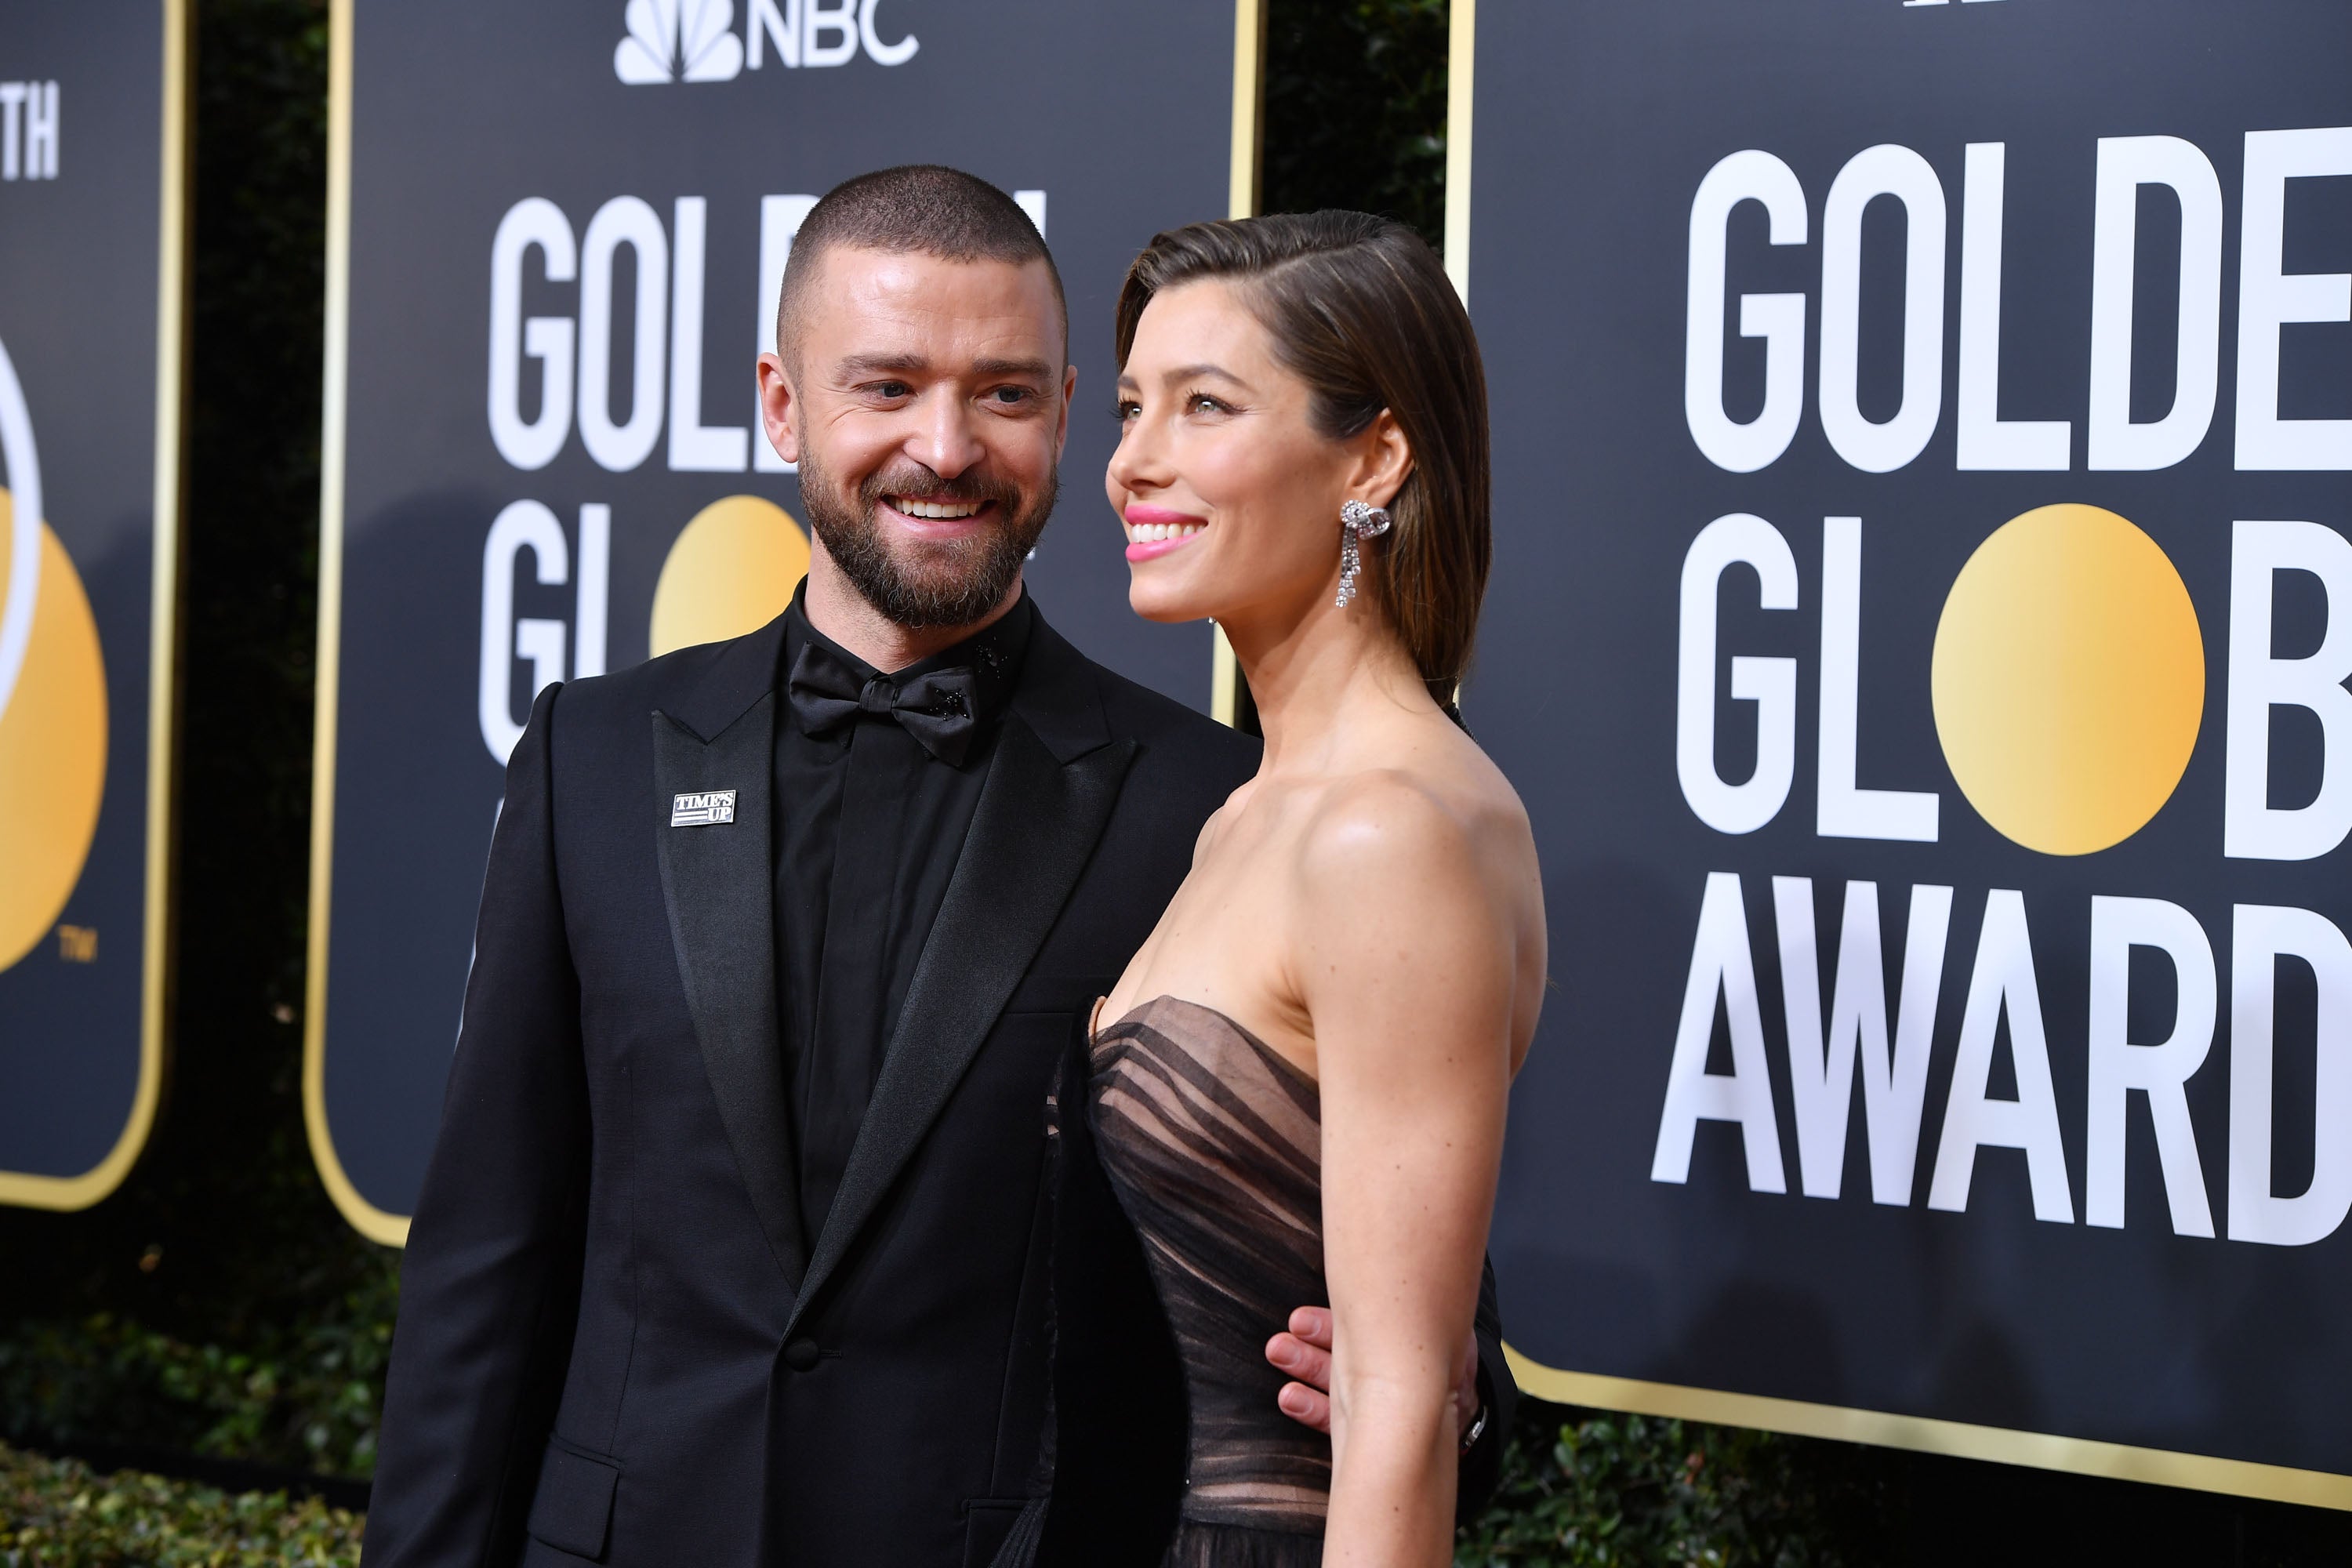 Jessica biel says her marriage to justin timberlake is the biggest priority entertainment tonight